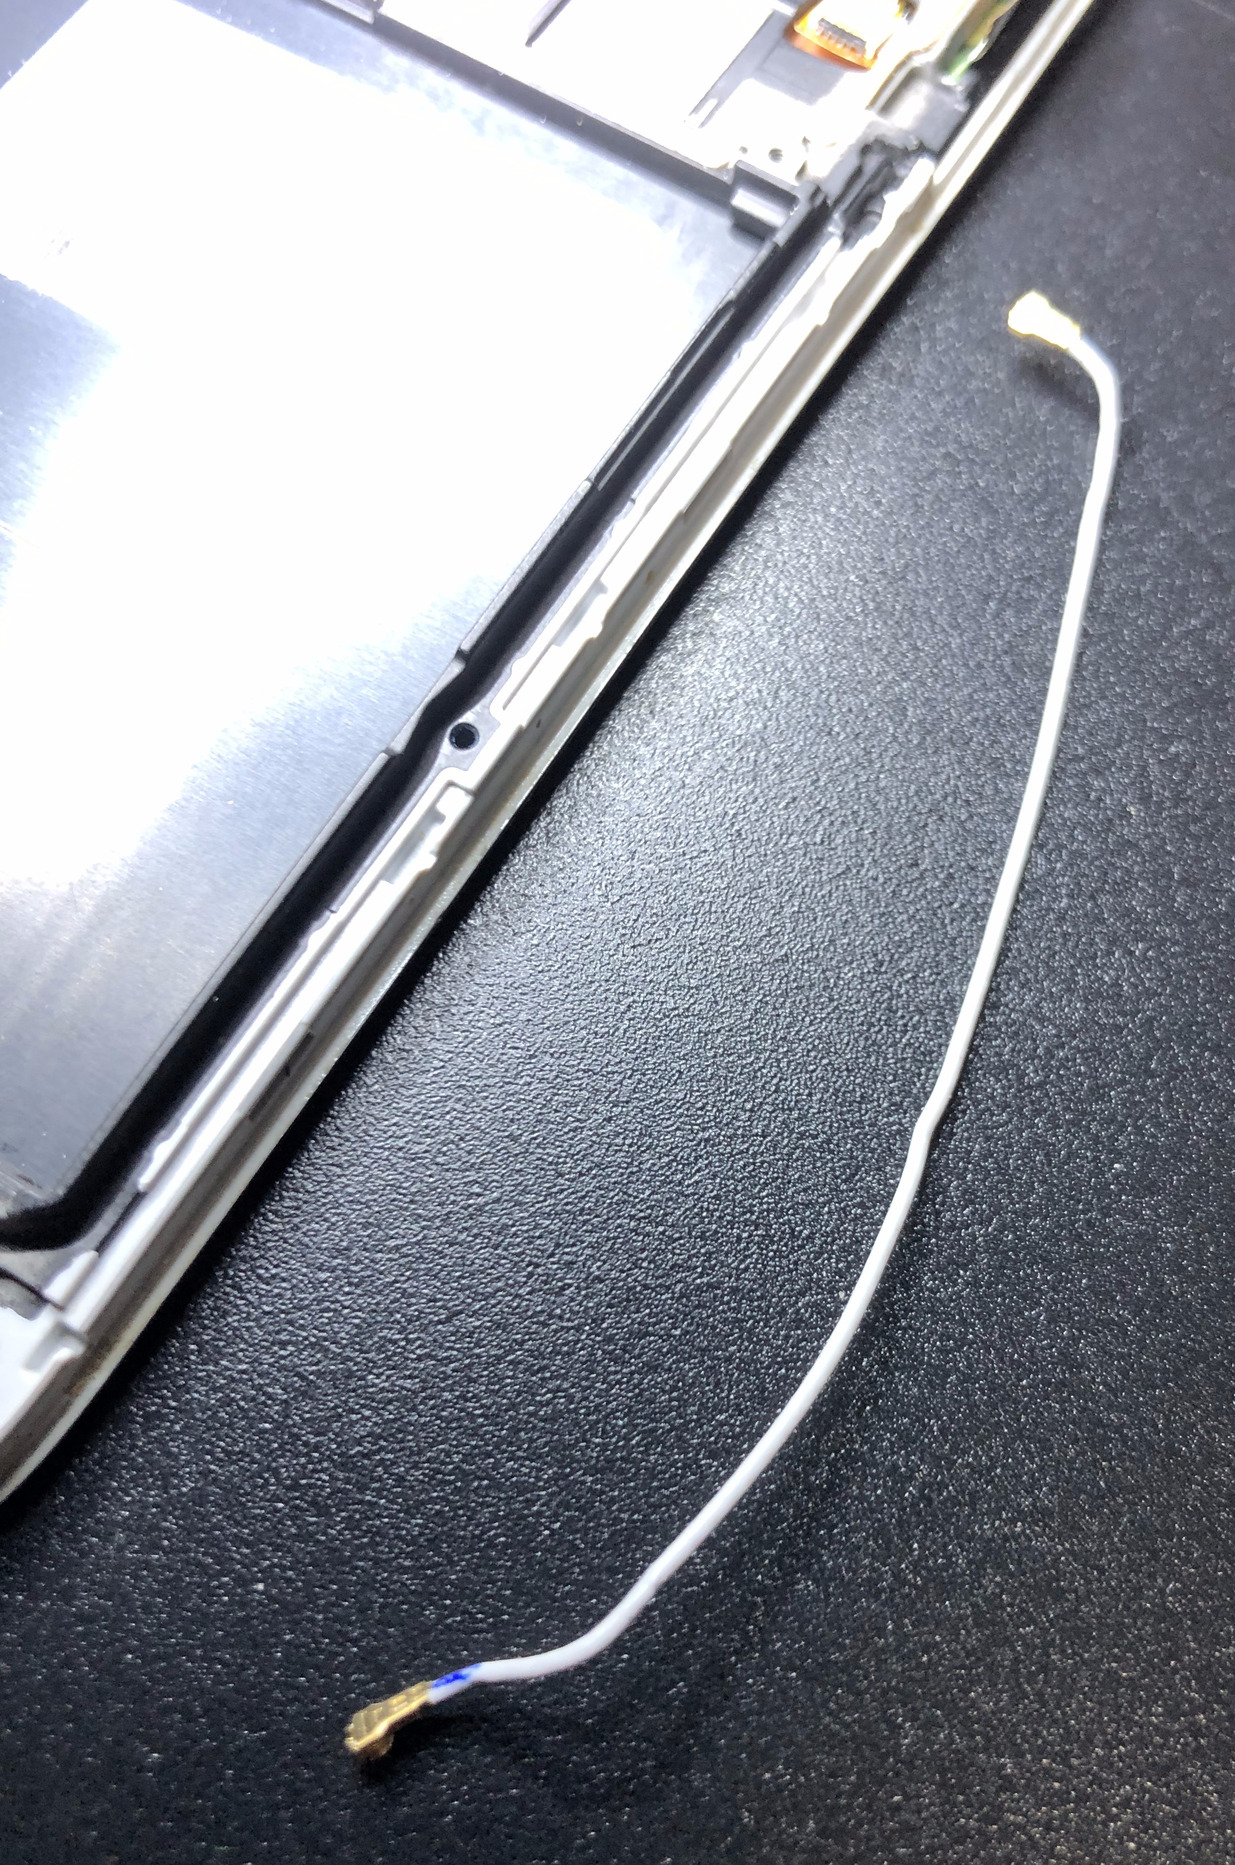 Remove the home button cable